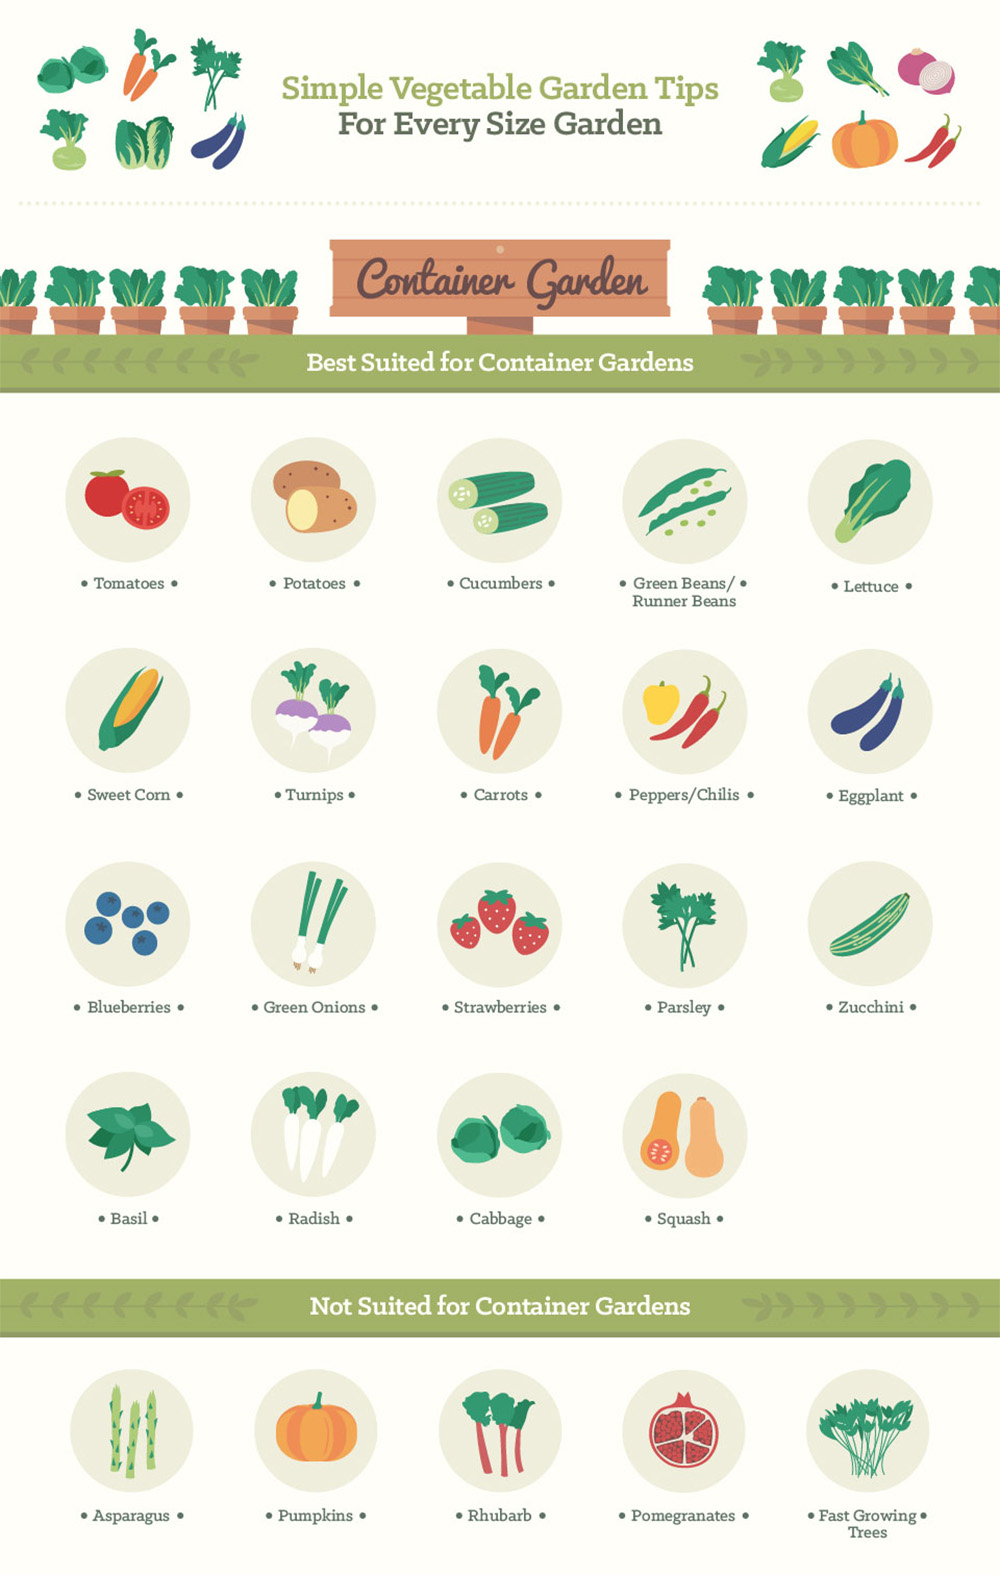 Infographic: Backyard Gardening Tips for Vegetables, Fruits, and Herbs